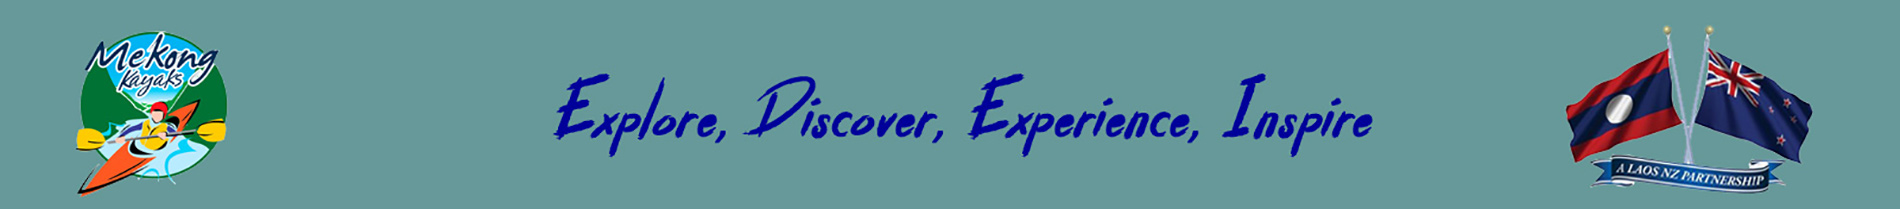 Explore, Discover, Experience, Inspire page with logo and flags banner